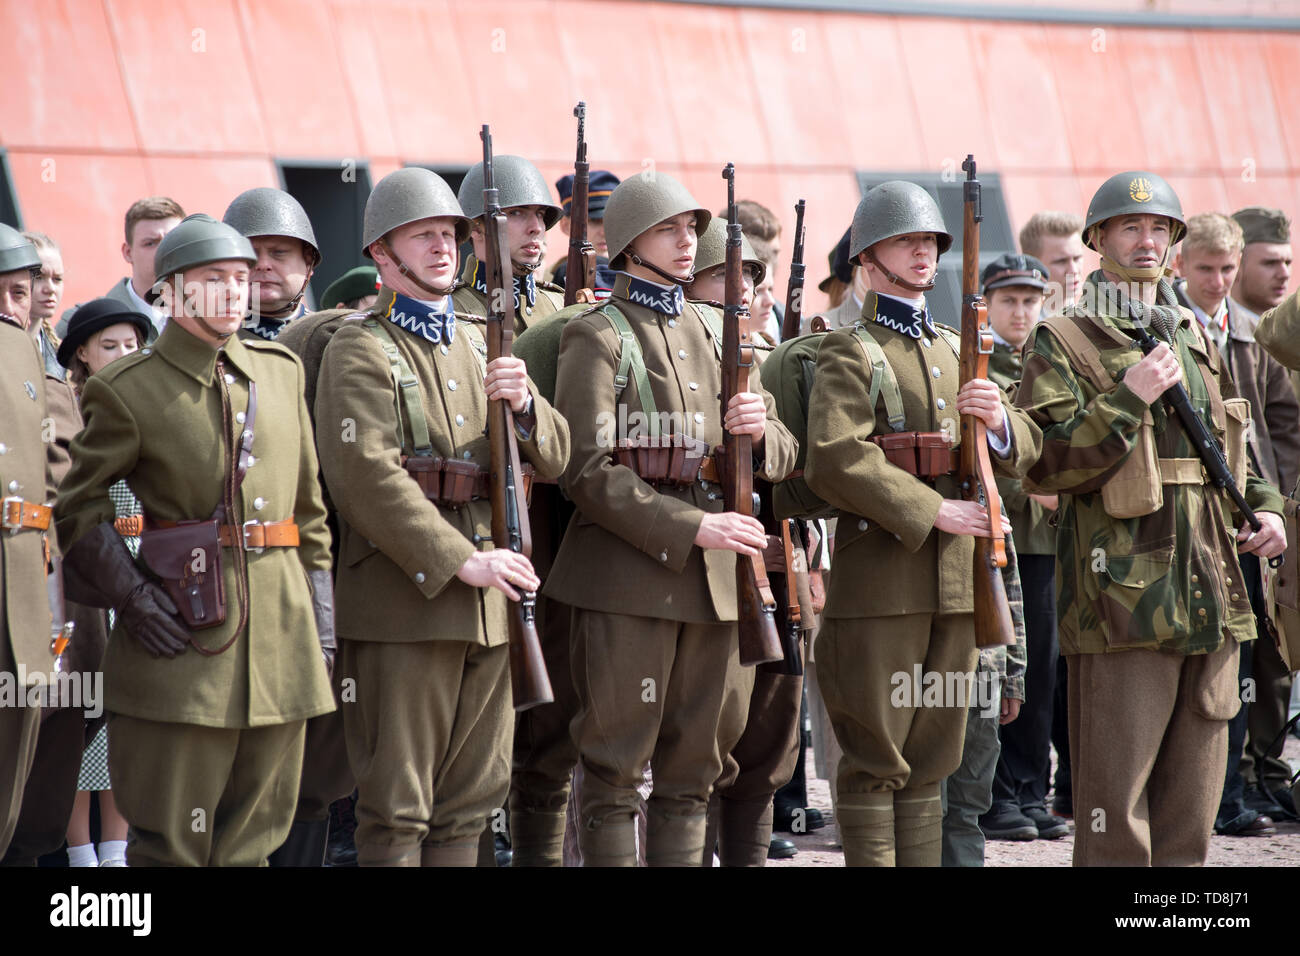 Reenactors of WWII Polish armed forces during Victory Parade in Gdansk,  Poland. May 11th 2019 © Wojciech Strozyk / Alamy Stock Photo *** Local  Captio Stock Photo - Alamy